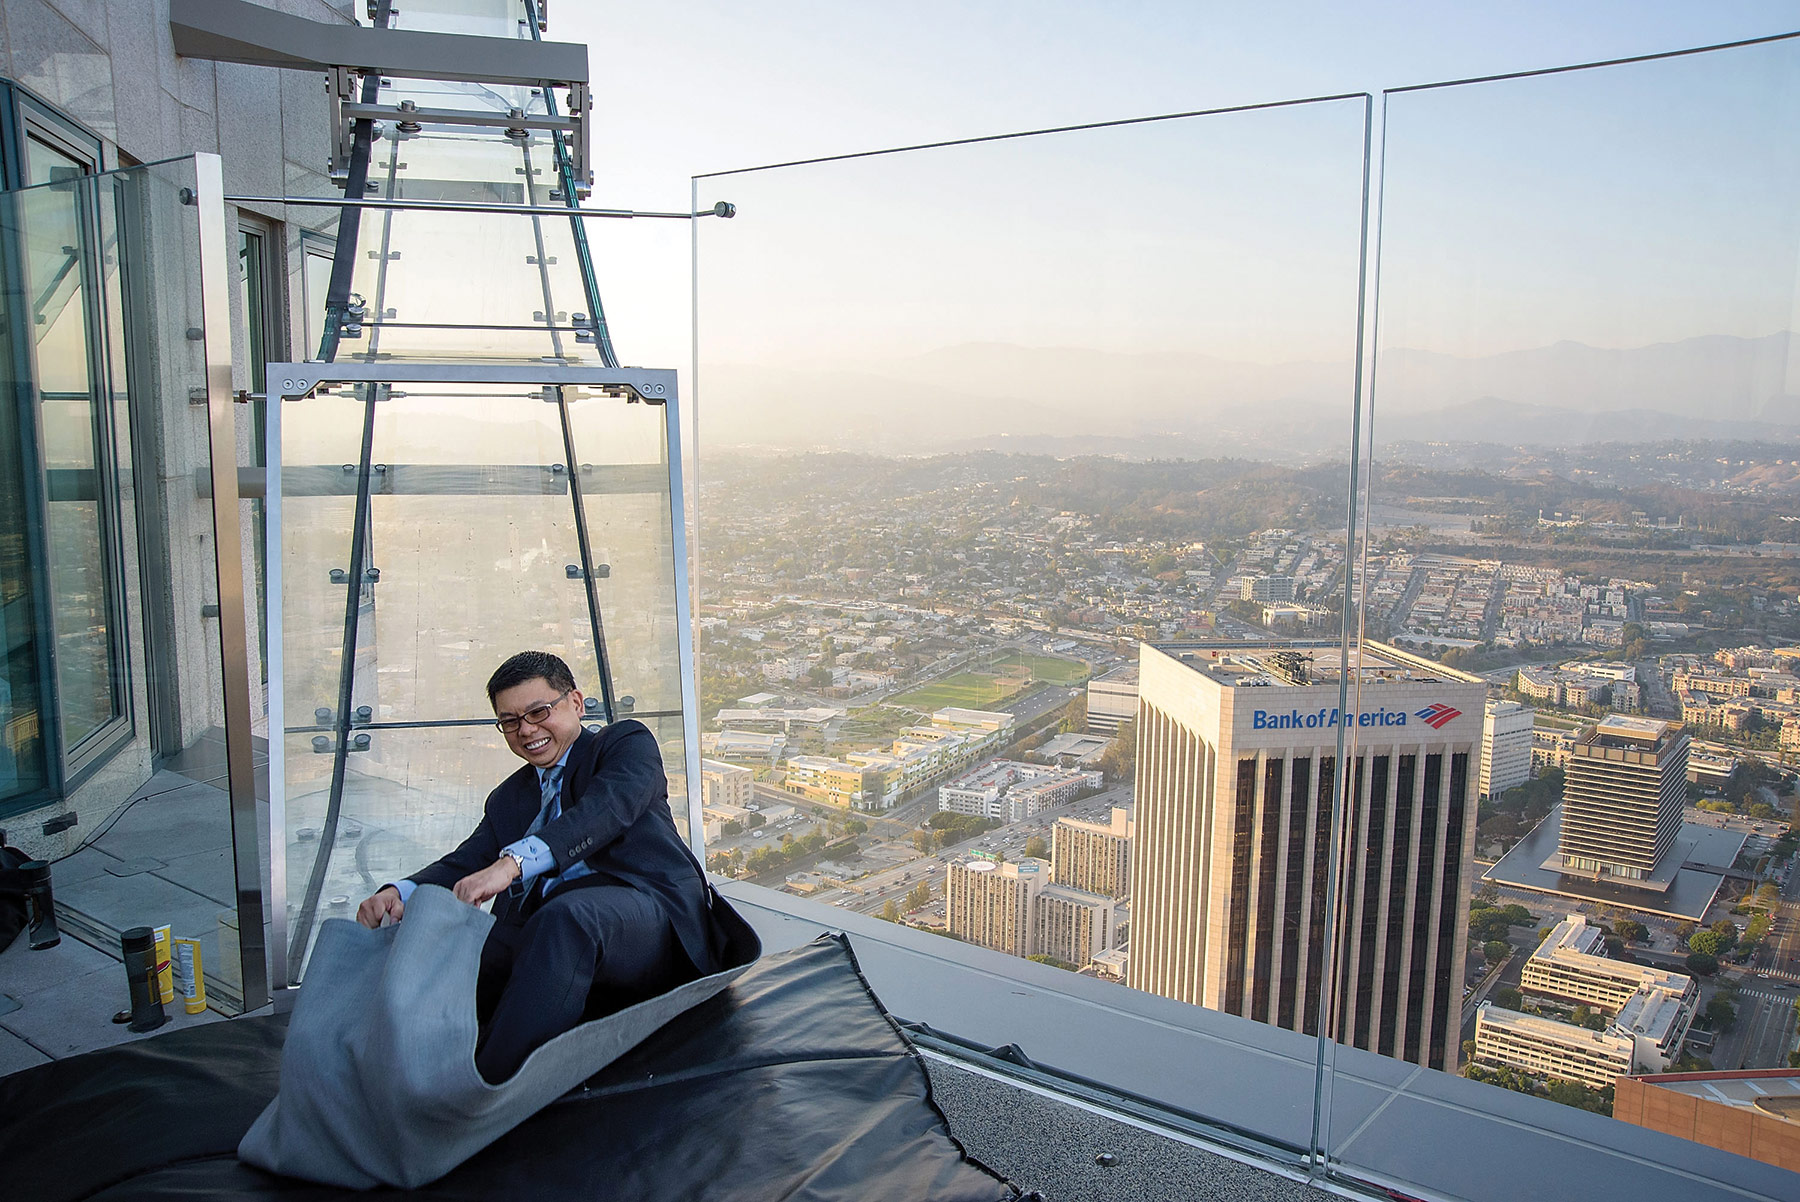 How L.A.'s glass Skyslide stays strong 1,000 feet up - Archpaper.com